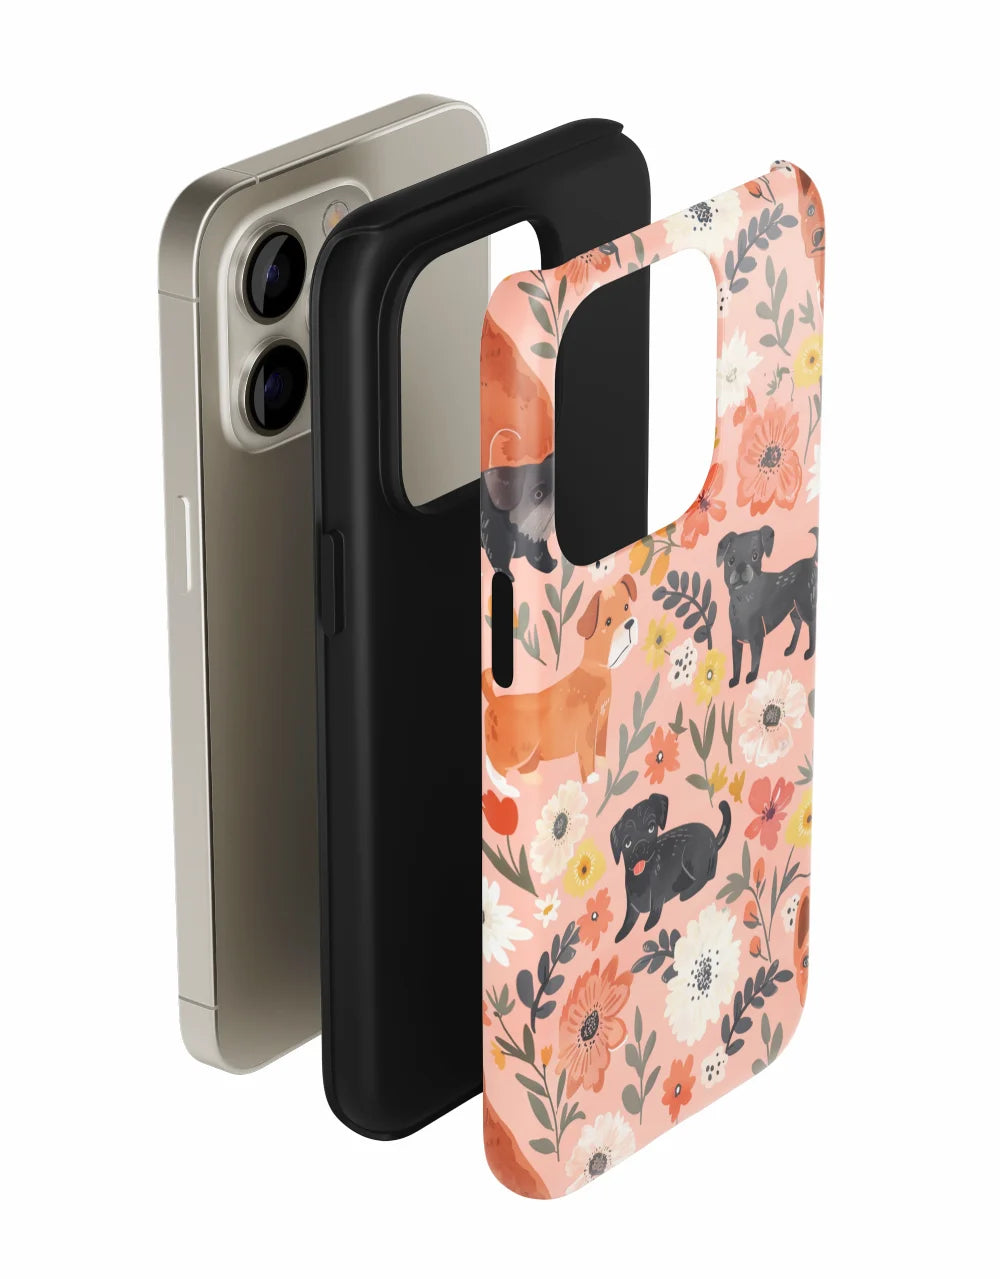 Floral Art Ⅱ: Flower and Dog Series Phone CaseFloral Art Ⅱ: Flower and Dog Series Phone Case